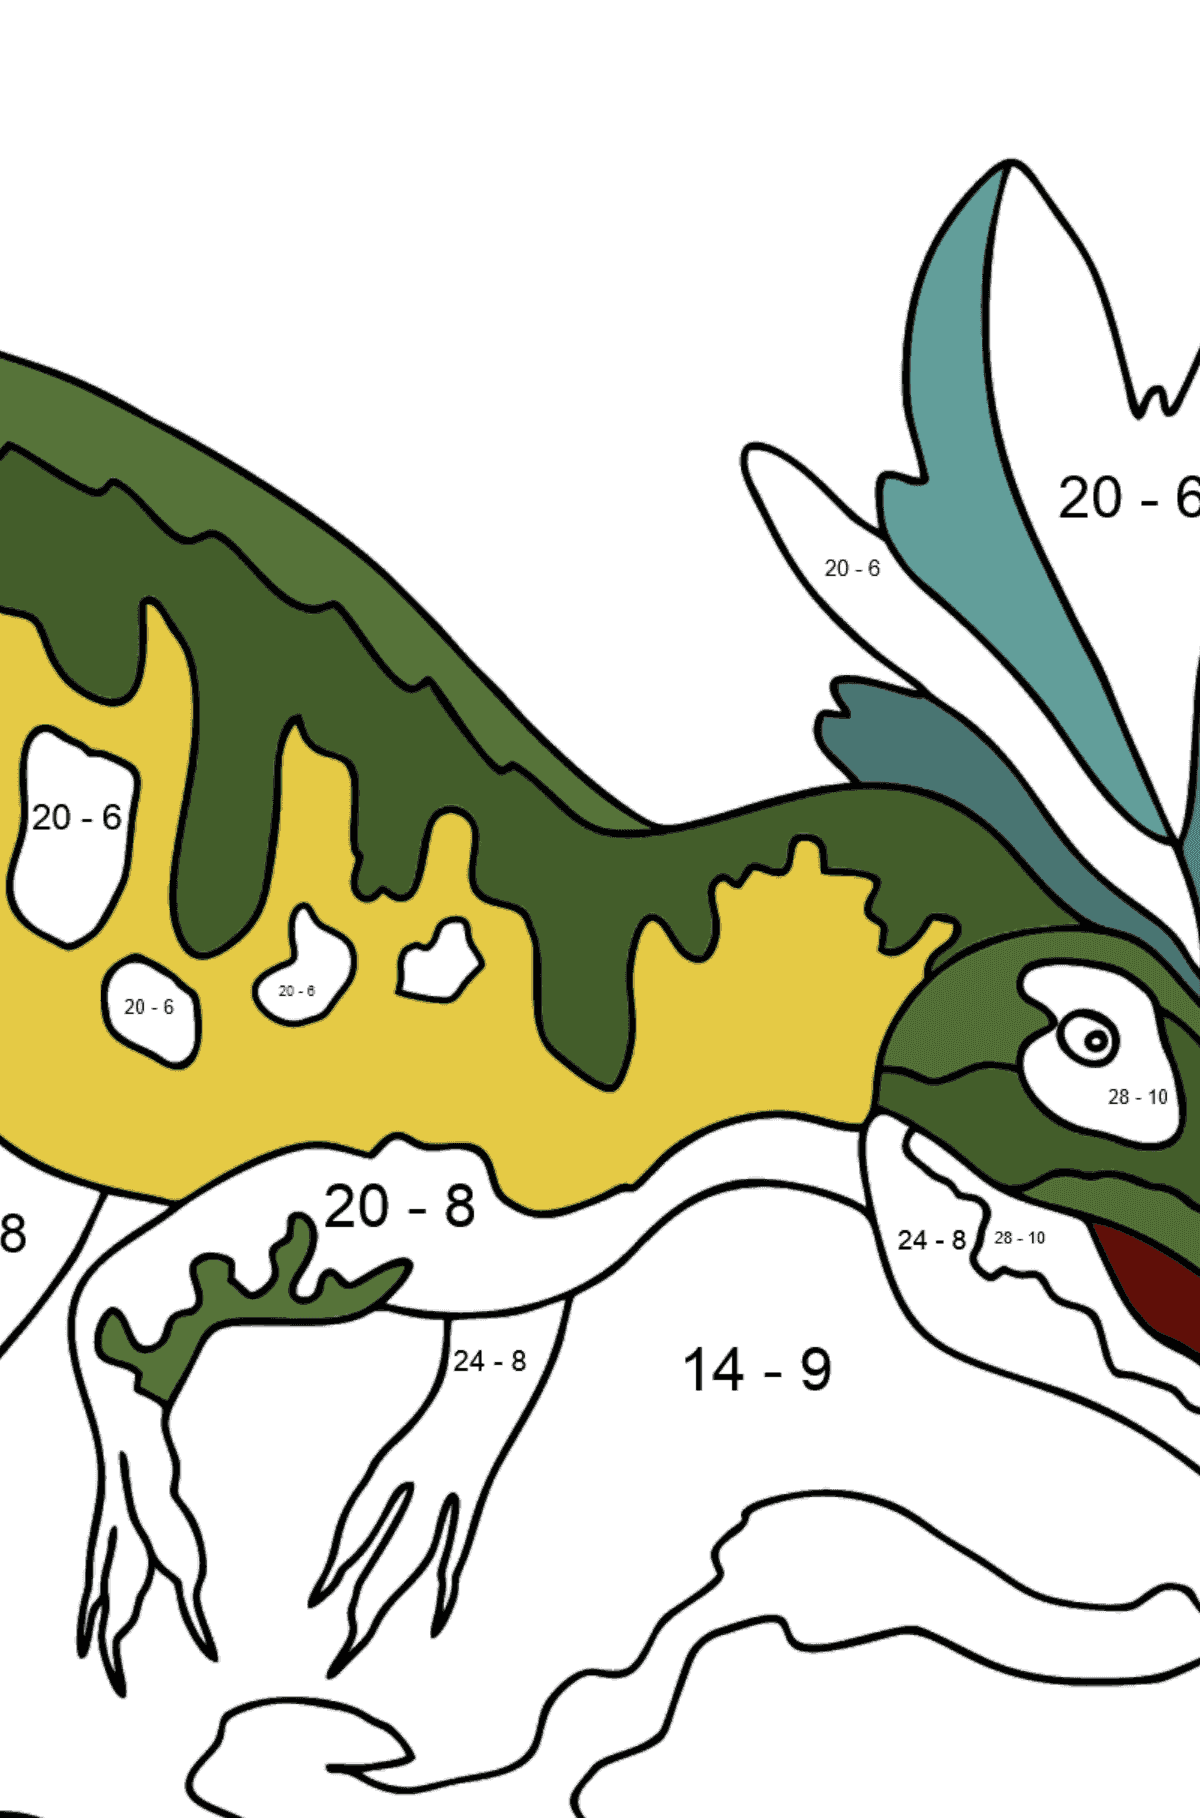 Coloring Page - Allosaurus - A Well-Researched Dinosaur - Math Coloring - Subtraction for Kids